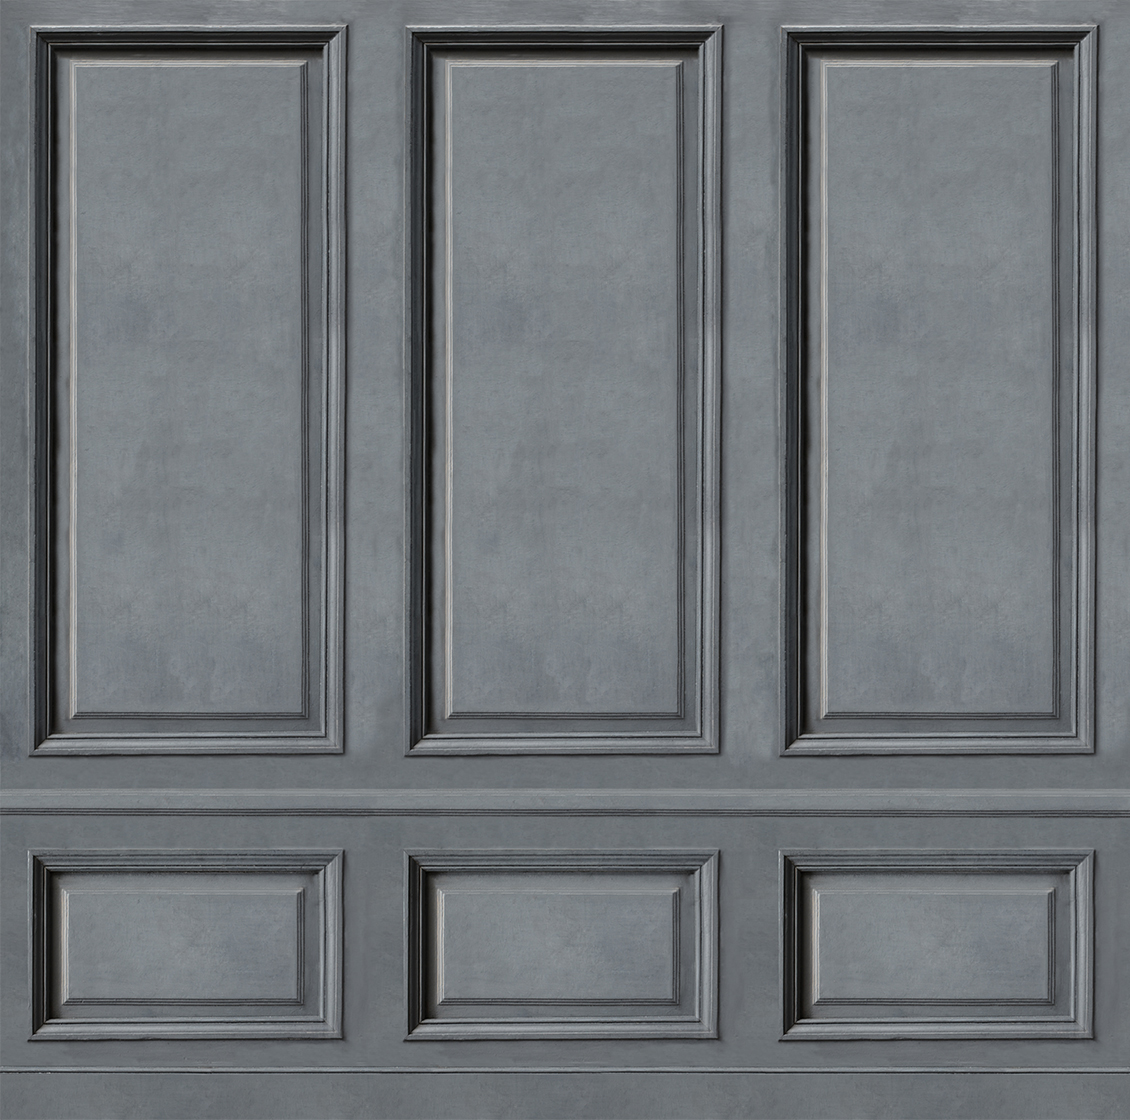 Boiserie wallpaper with realistic classic gray paneling